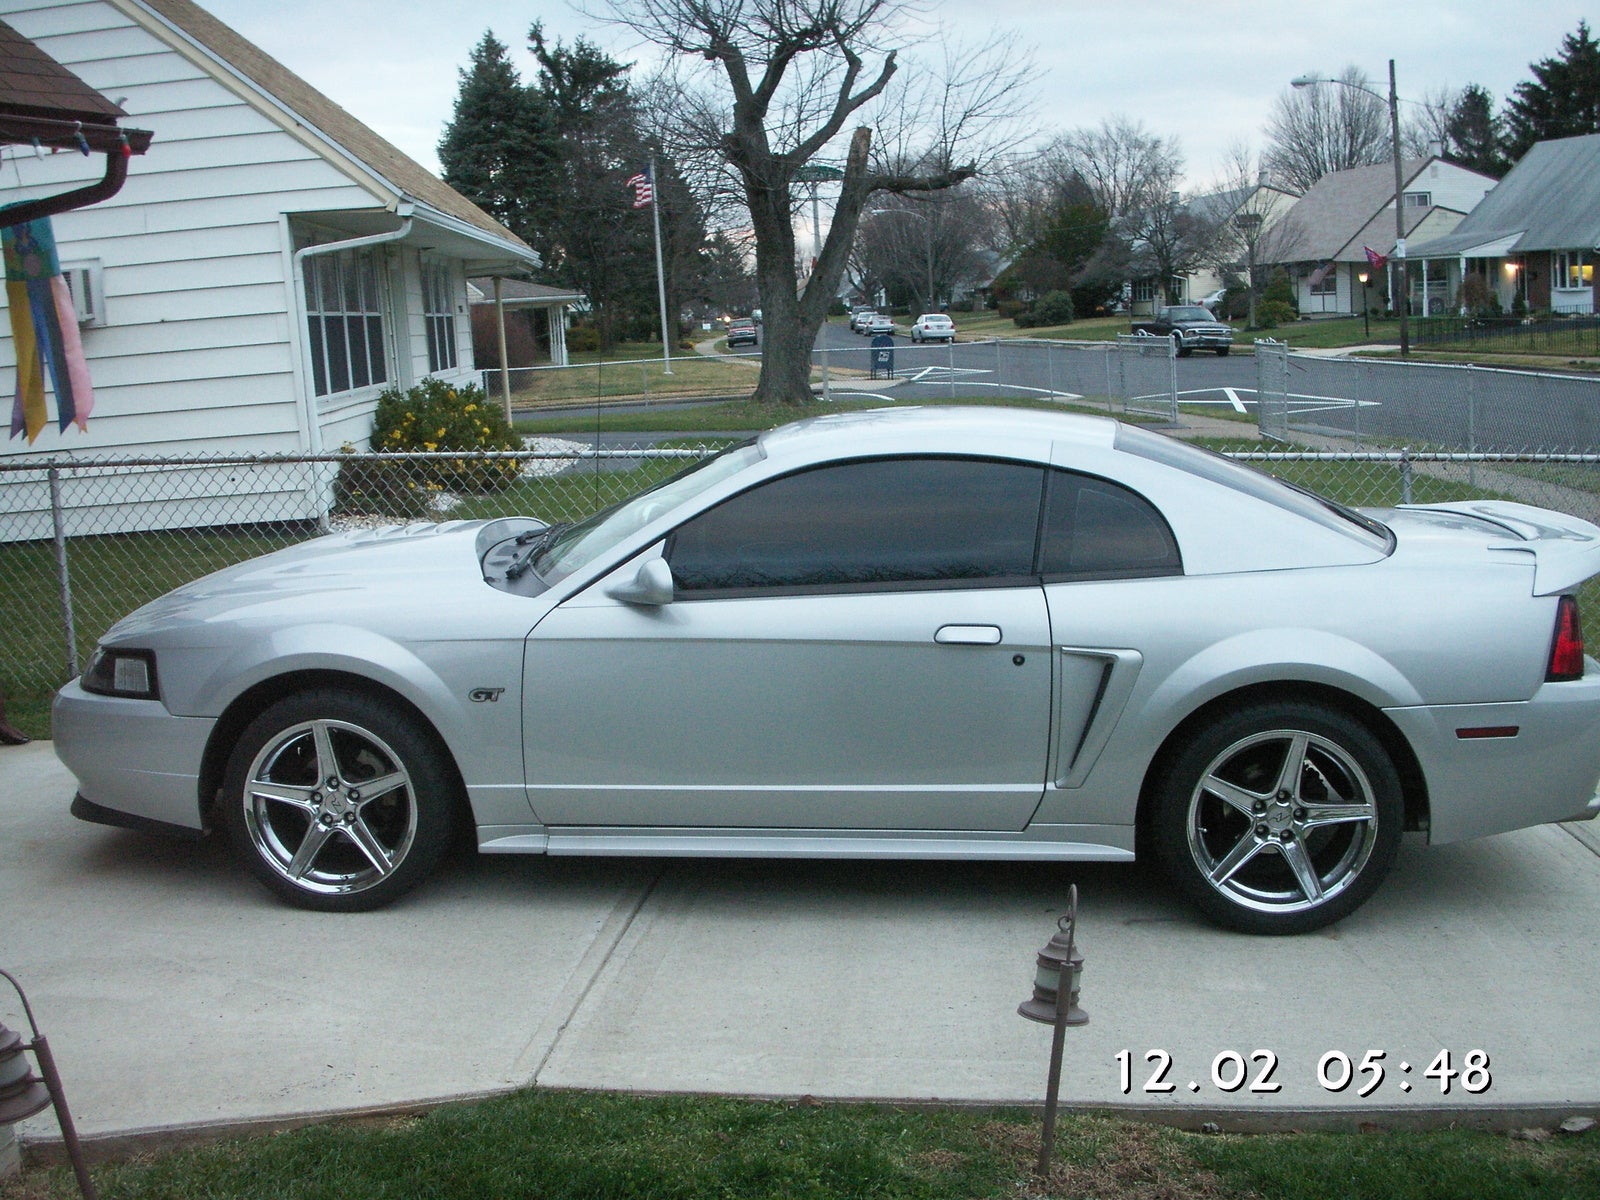 2000 Ford mustang gt specs 0-60 #2